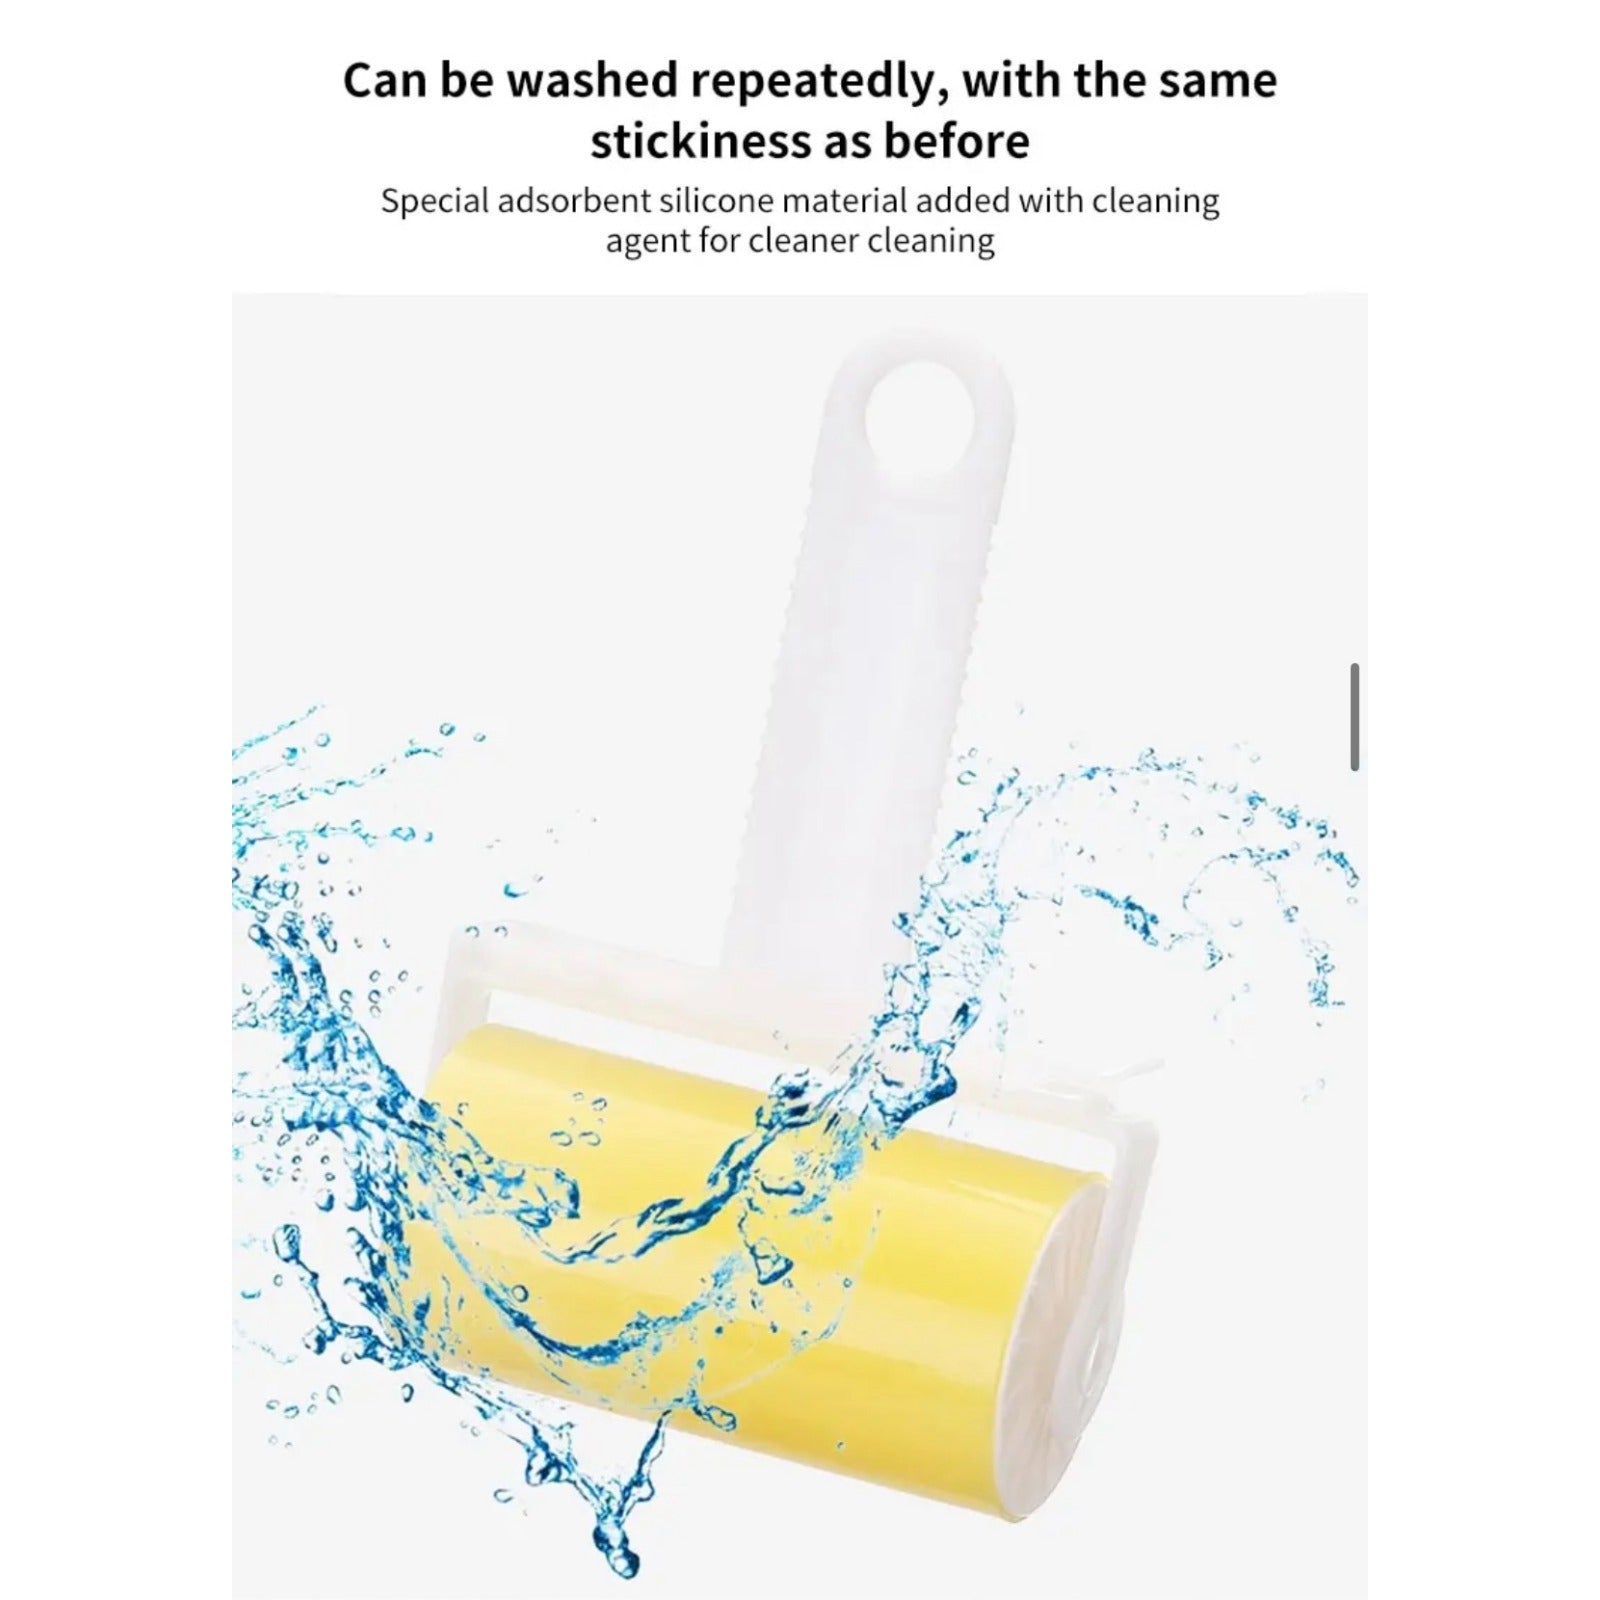 Reusable Lint Remover with water splashing on it showcasing it can be washed repeatedly with the same stickiness as before